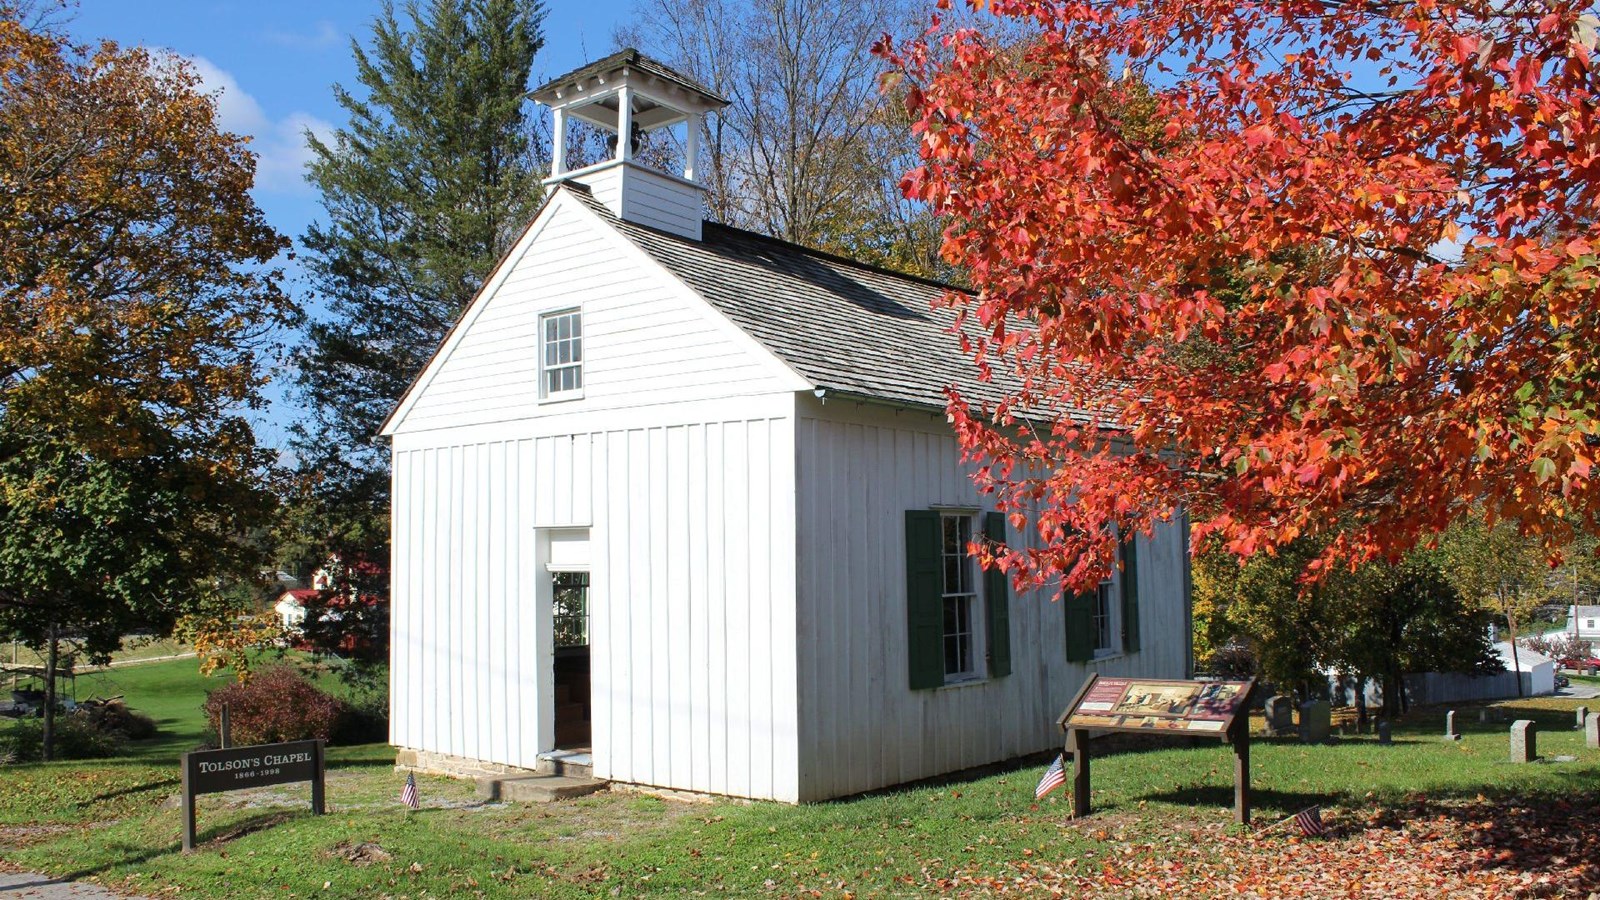 A small white wooden chapel amongst autumn-colored trees.